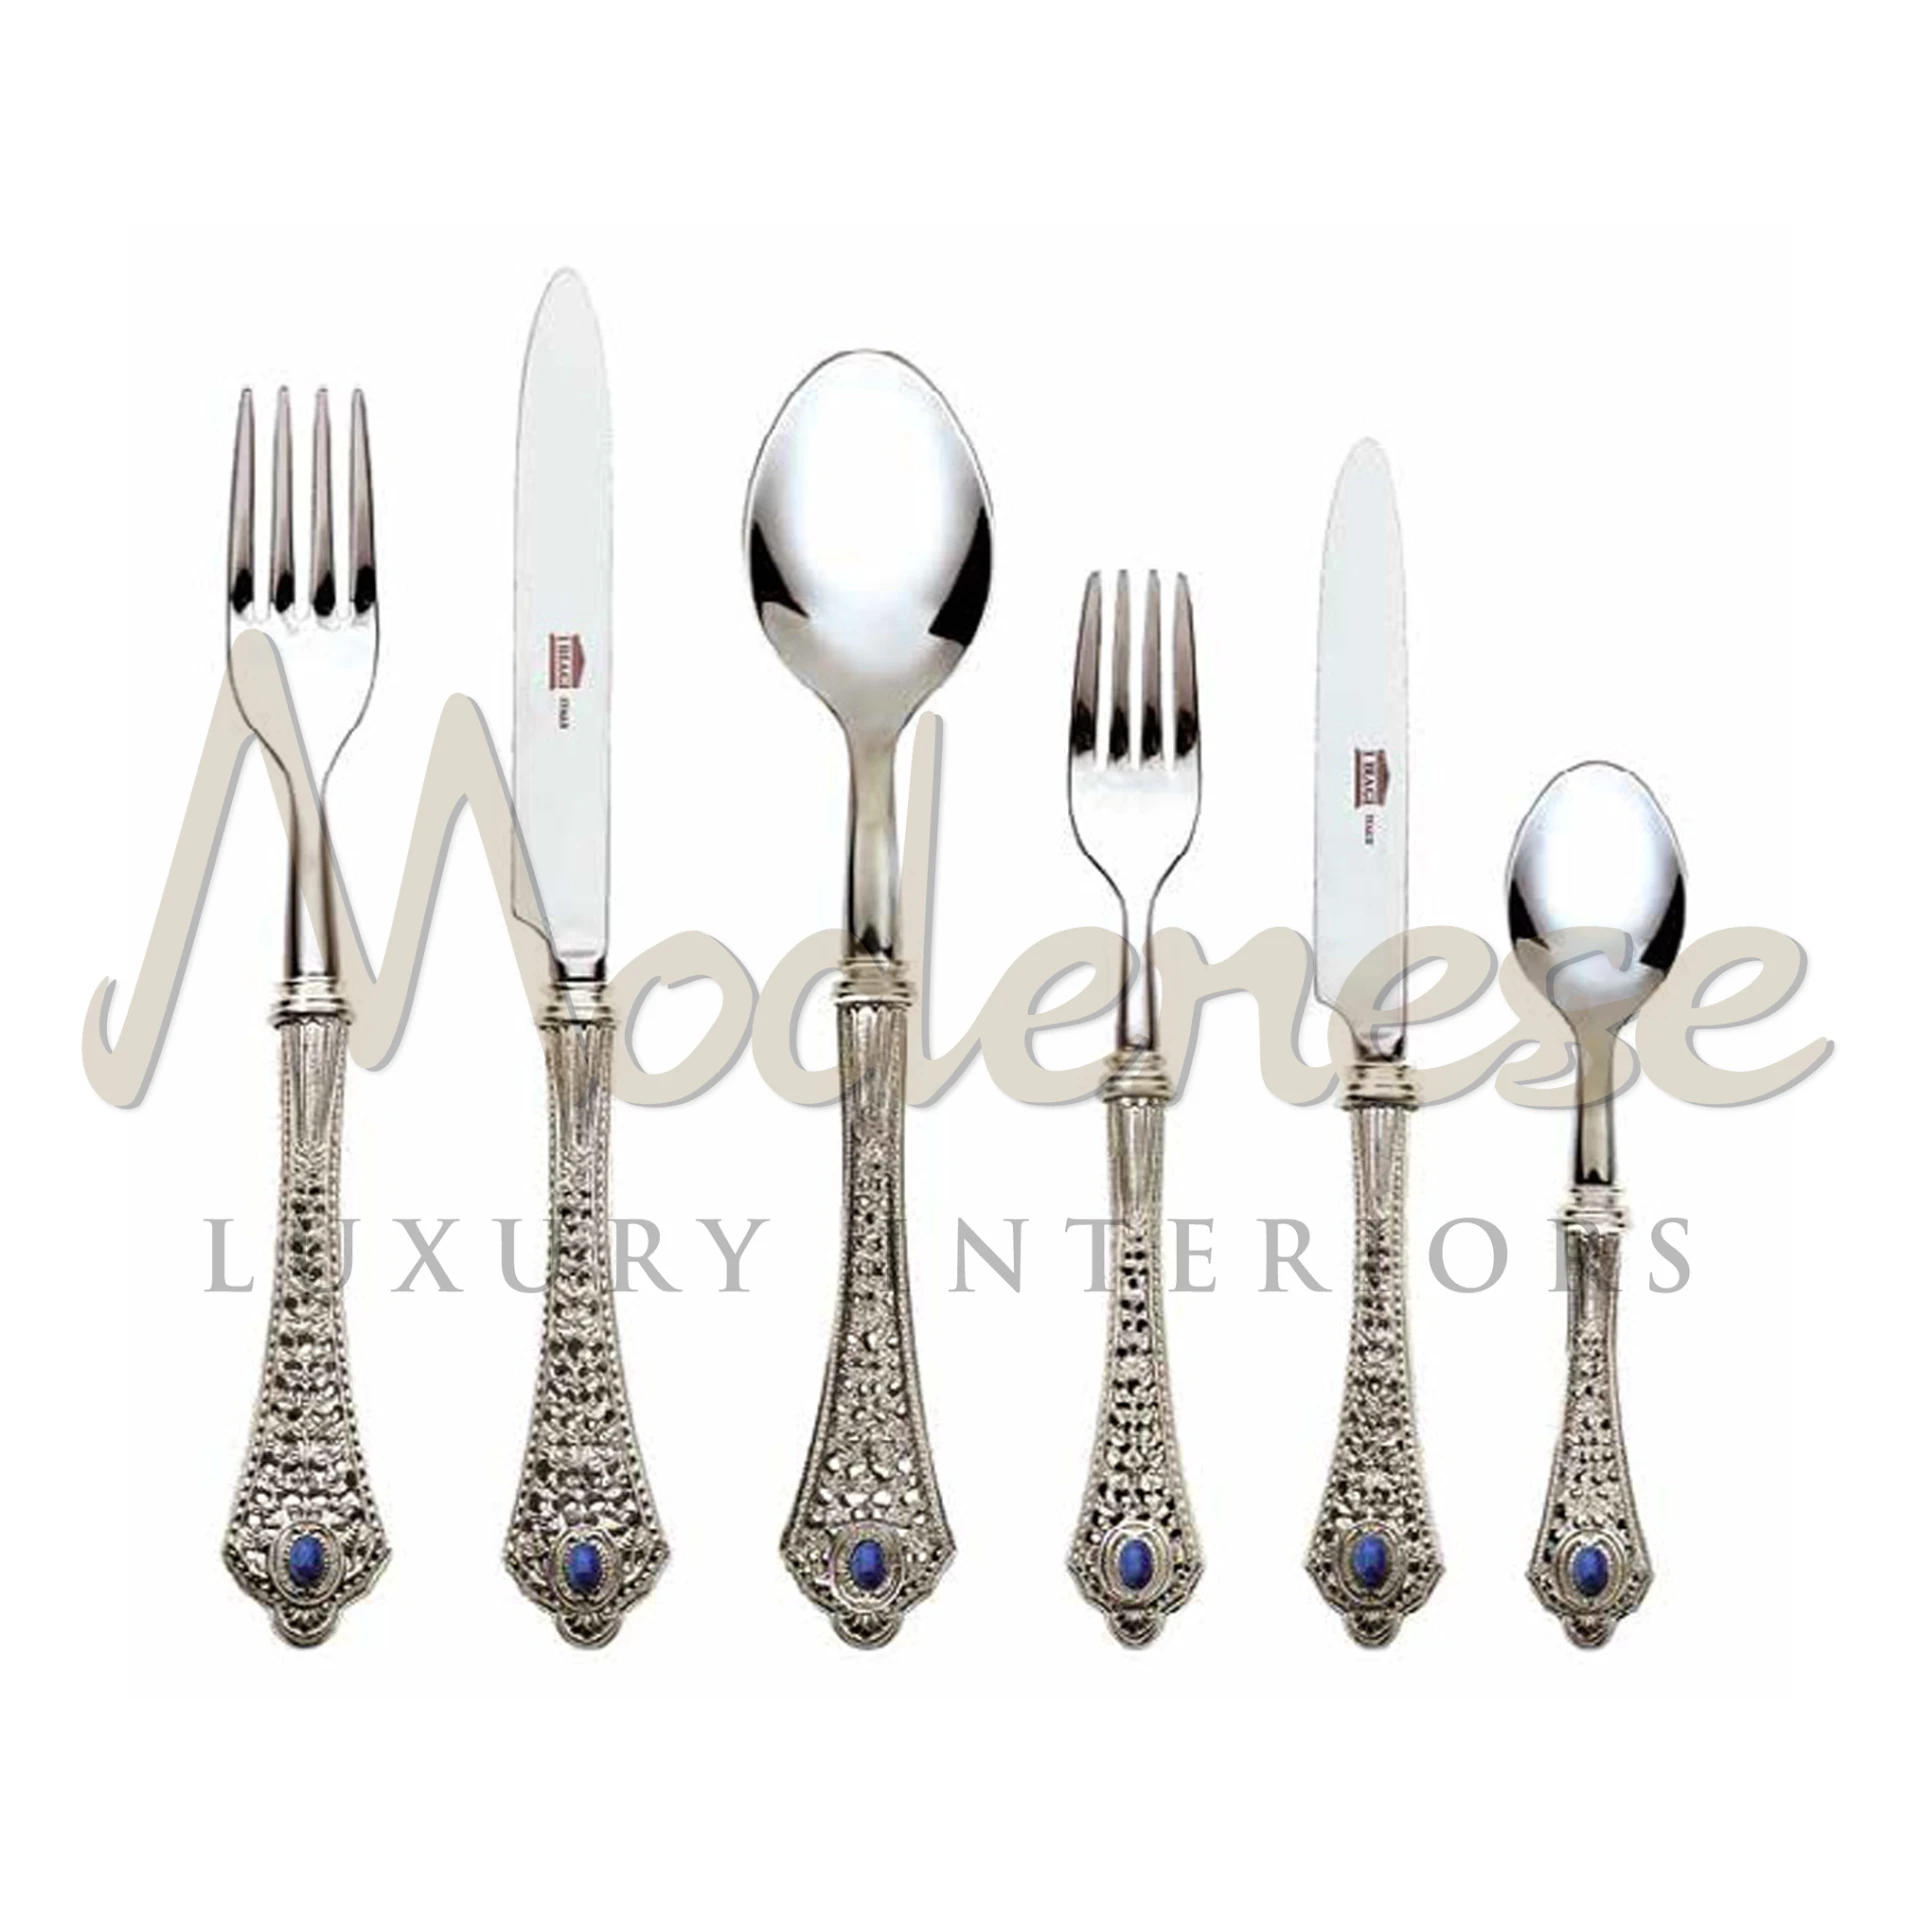 Elegant 'Exclusive Silver Cutlery Set' with intricate handle designs & blue gemstone.